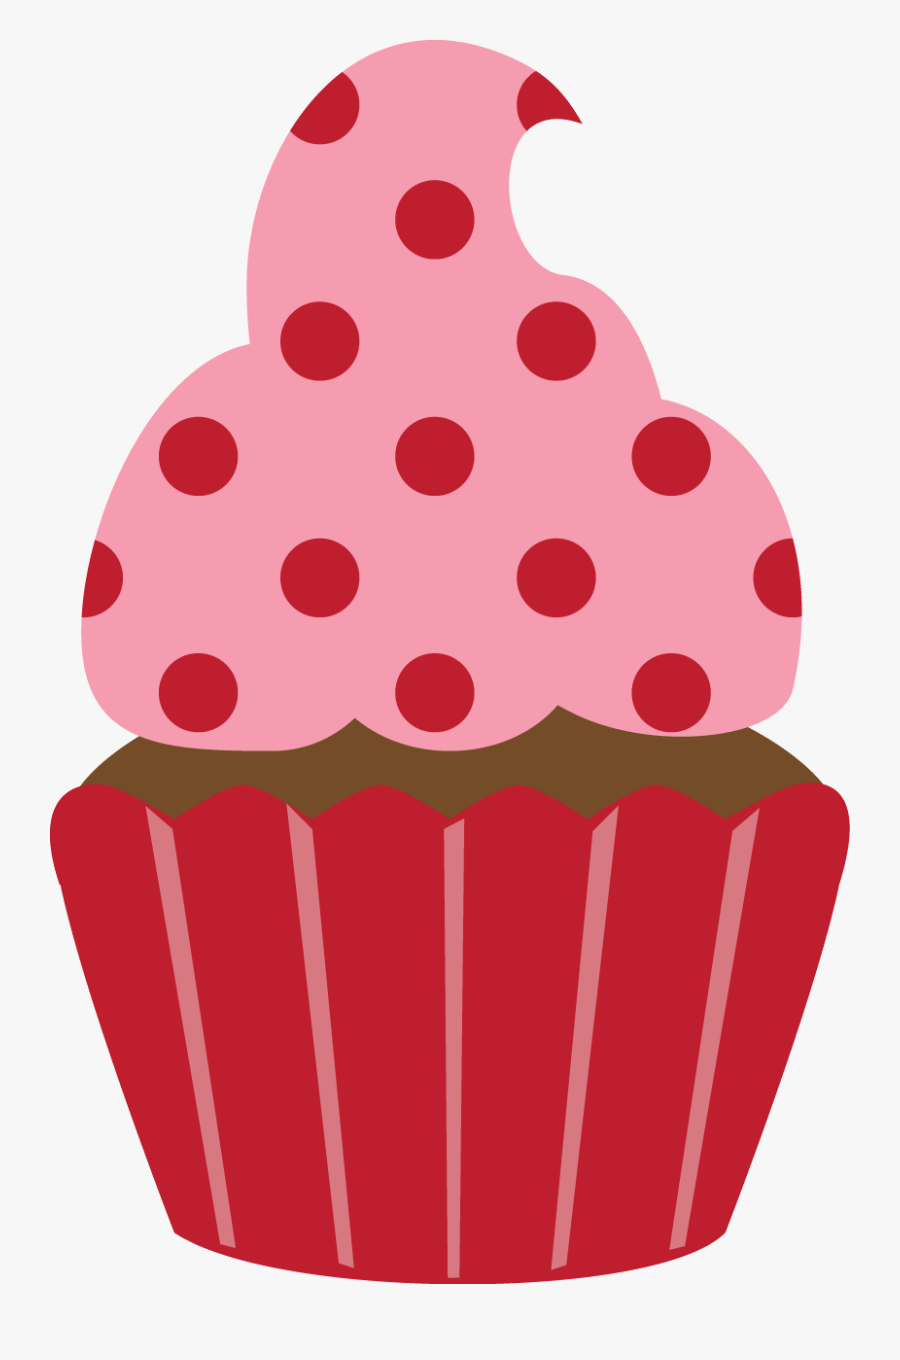 Cupcake Clipart Red, Transparent Clipart